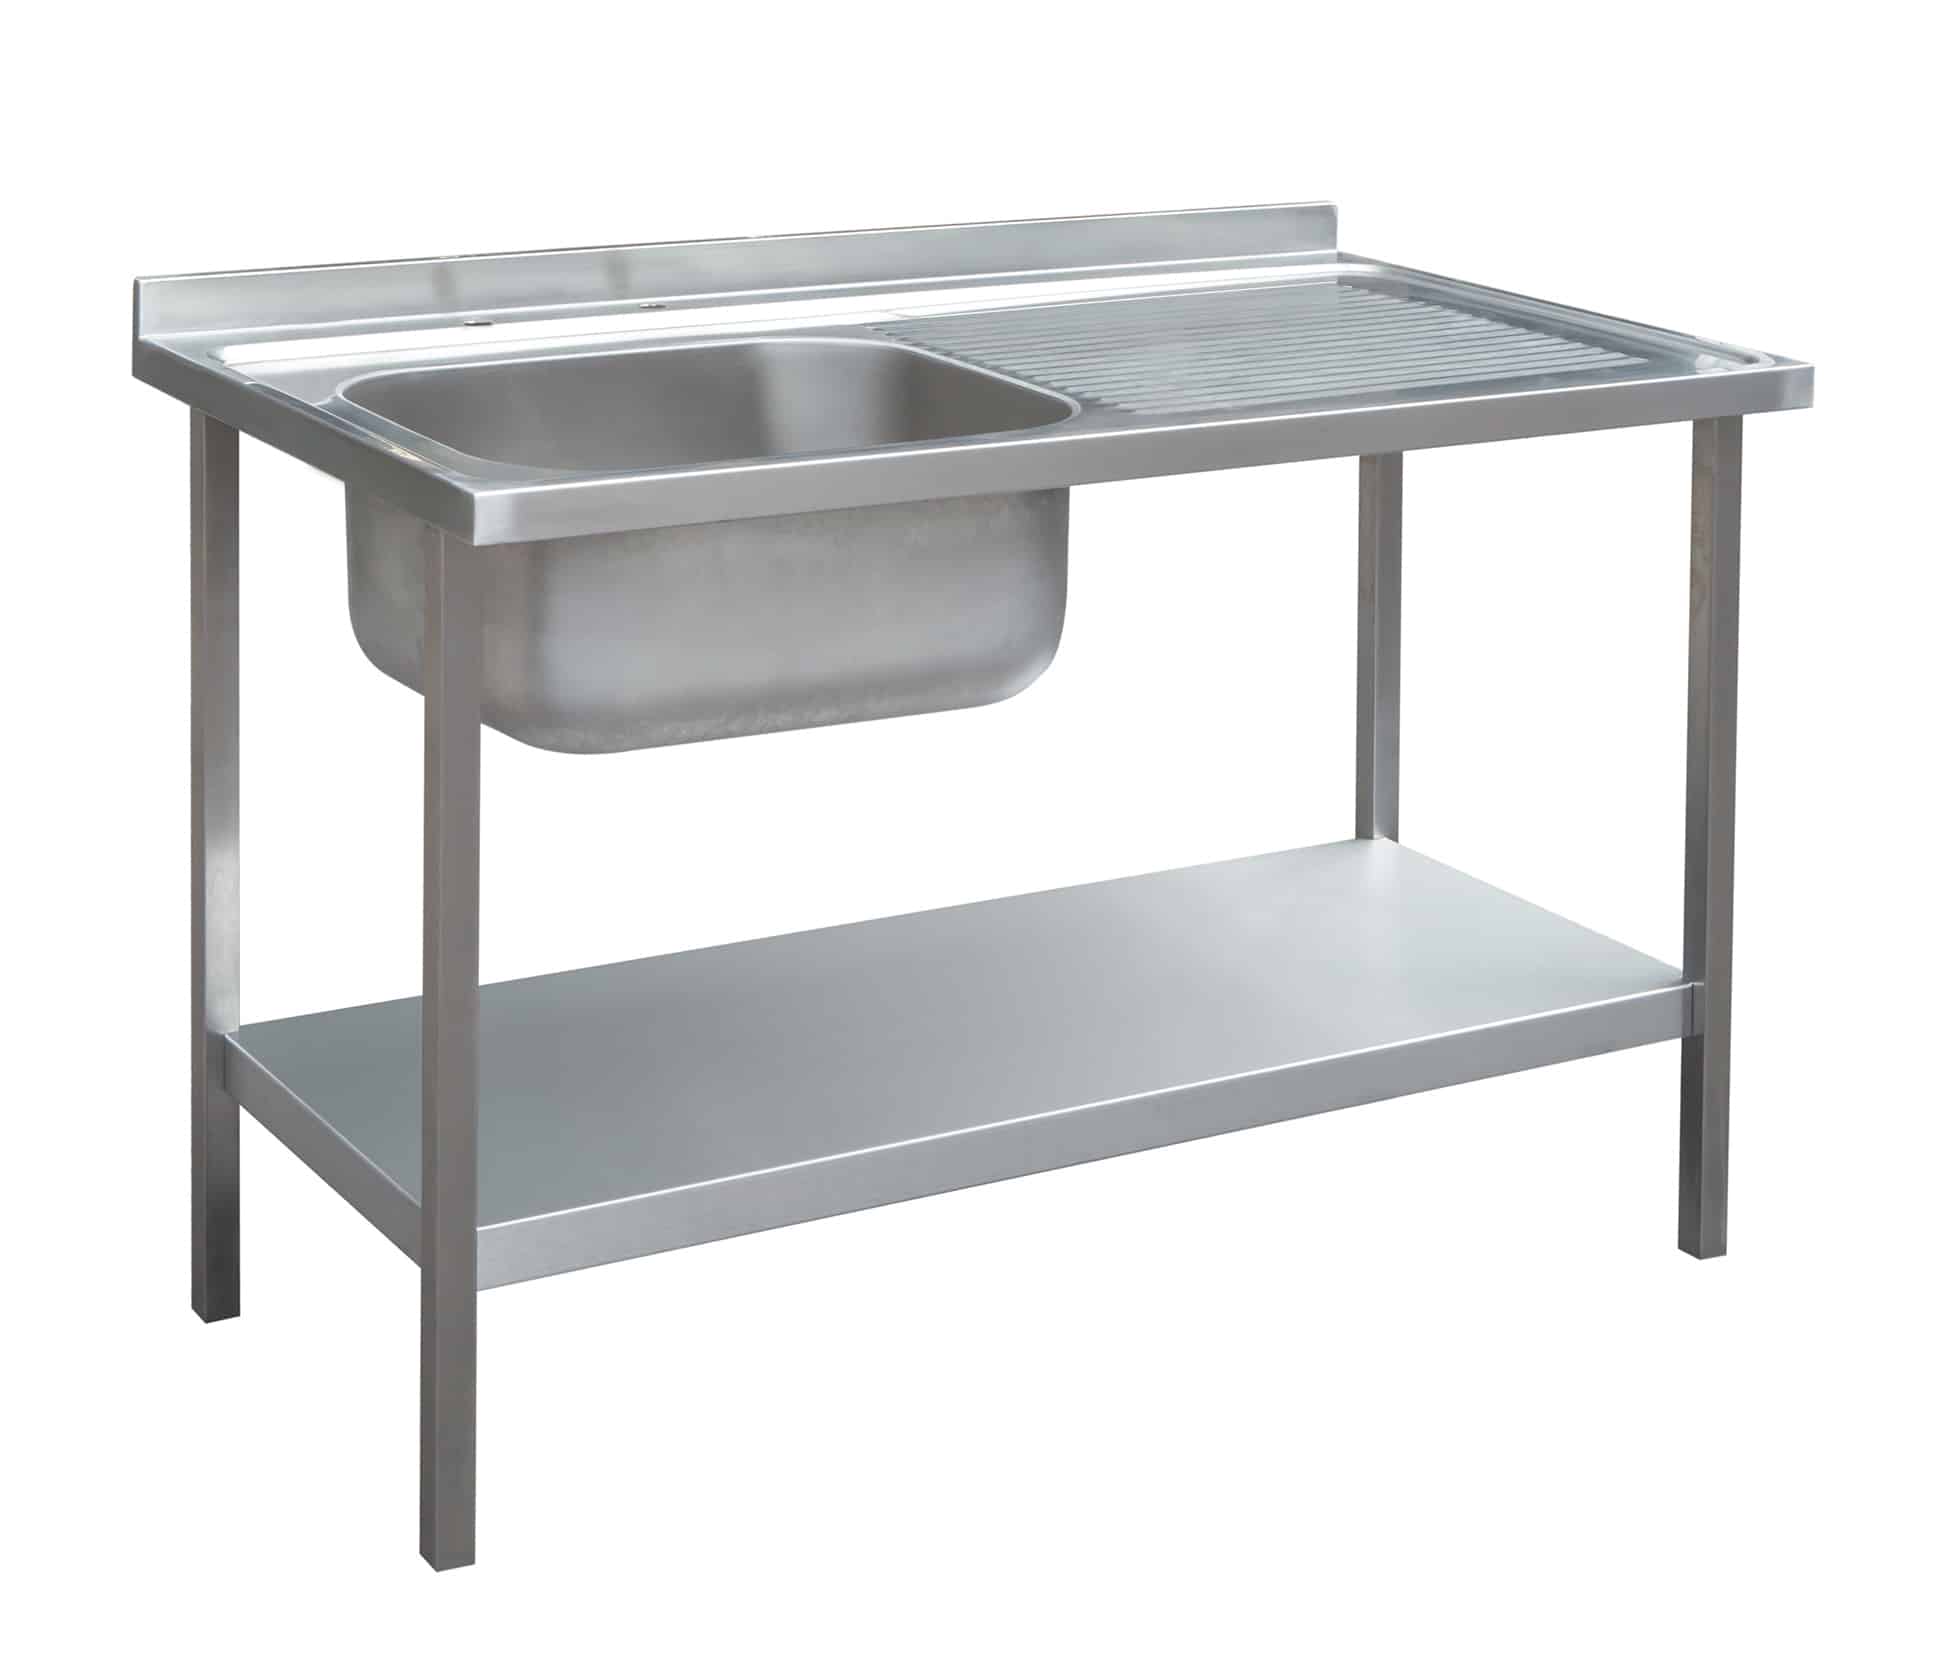 Stainless steel single bowl sink with drainer and under shelf